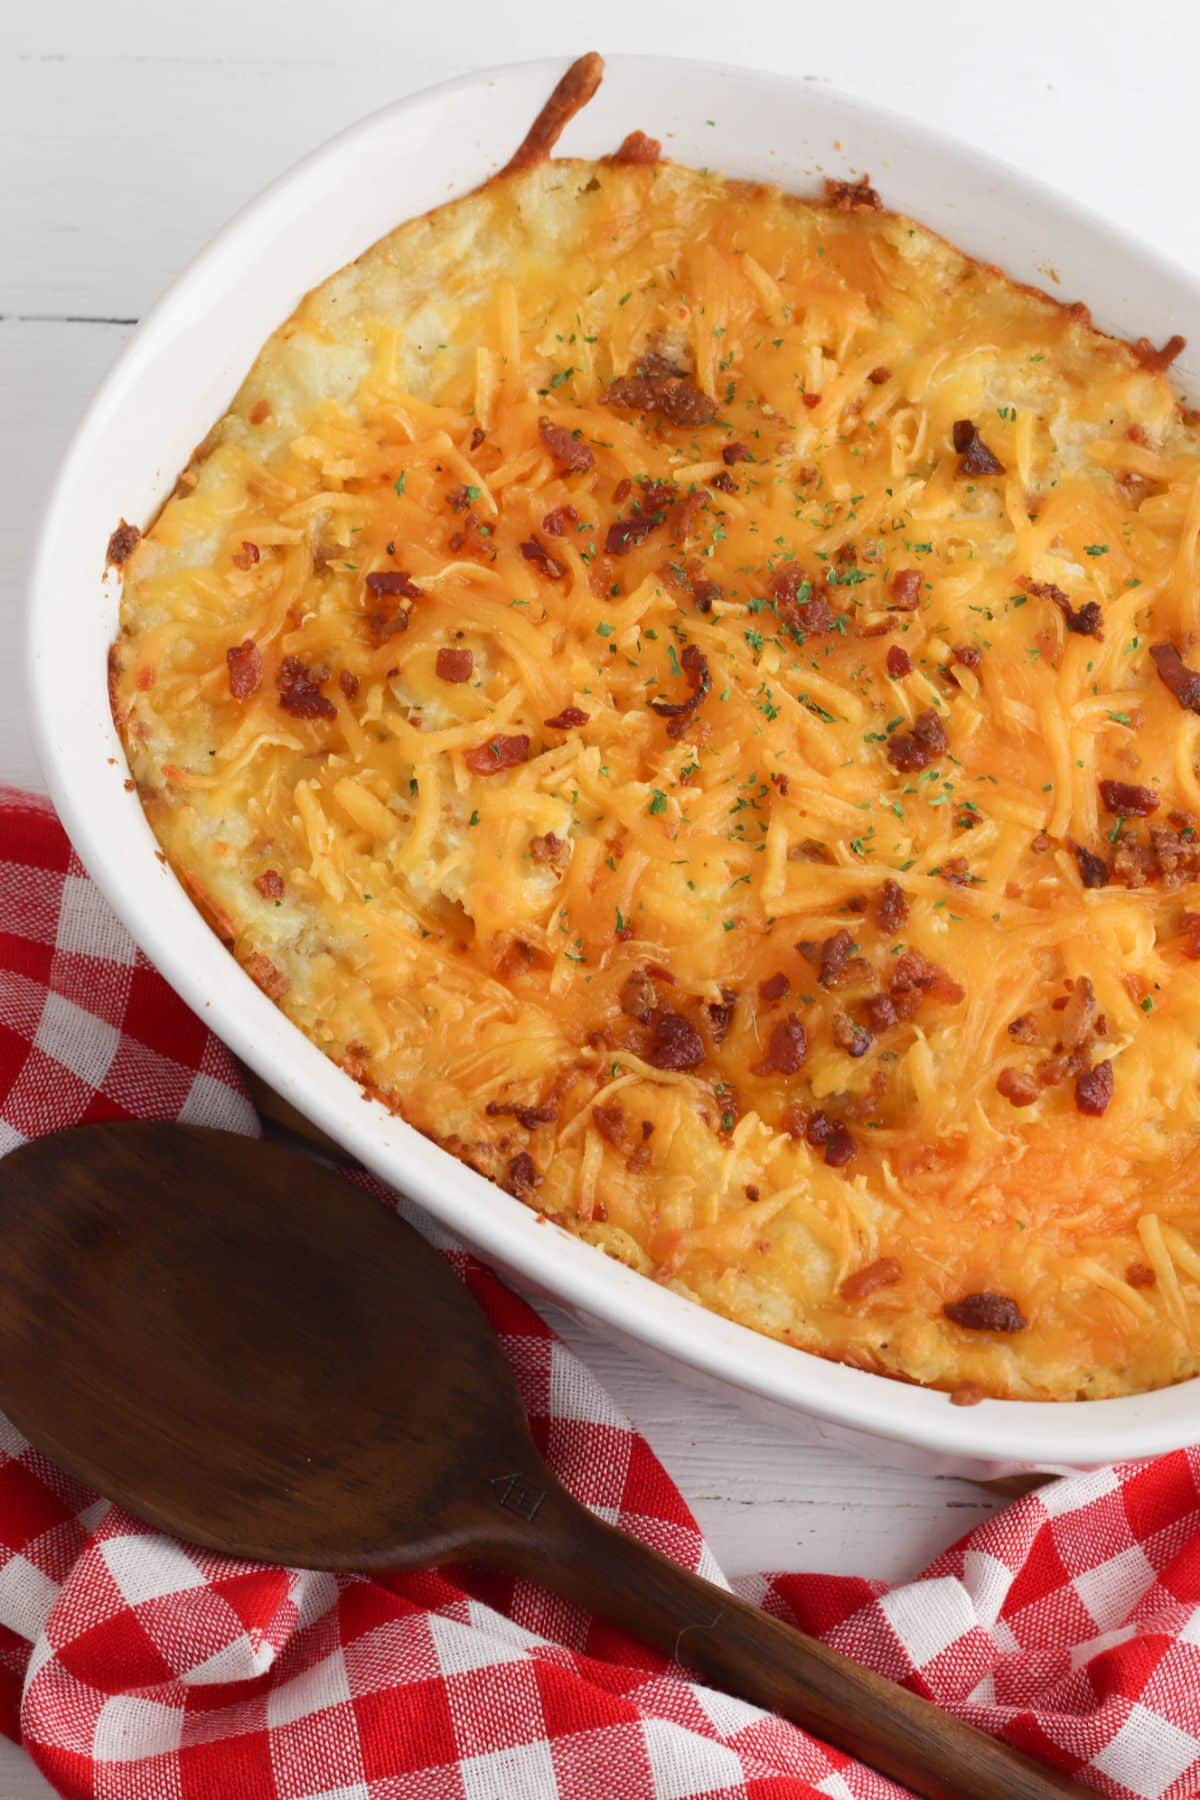 Twice Baked Loaded Potato Casserole in a baking dish. Wooden spoon with red and white checkered tablecloth on the side.